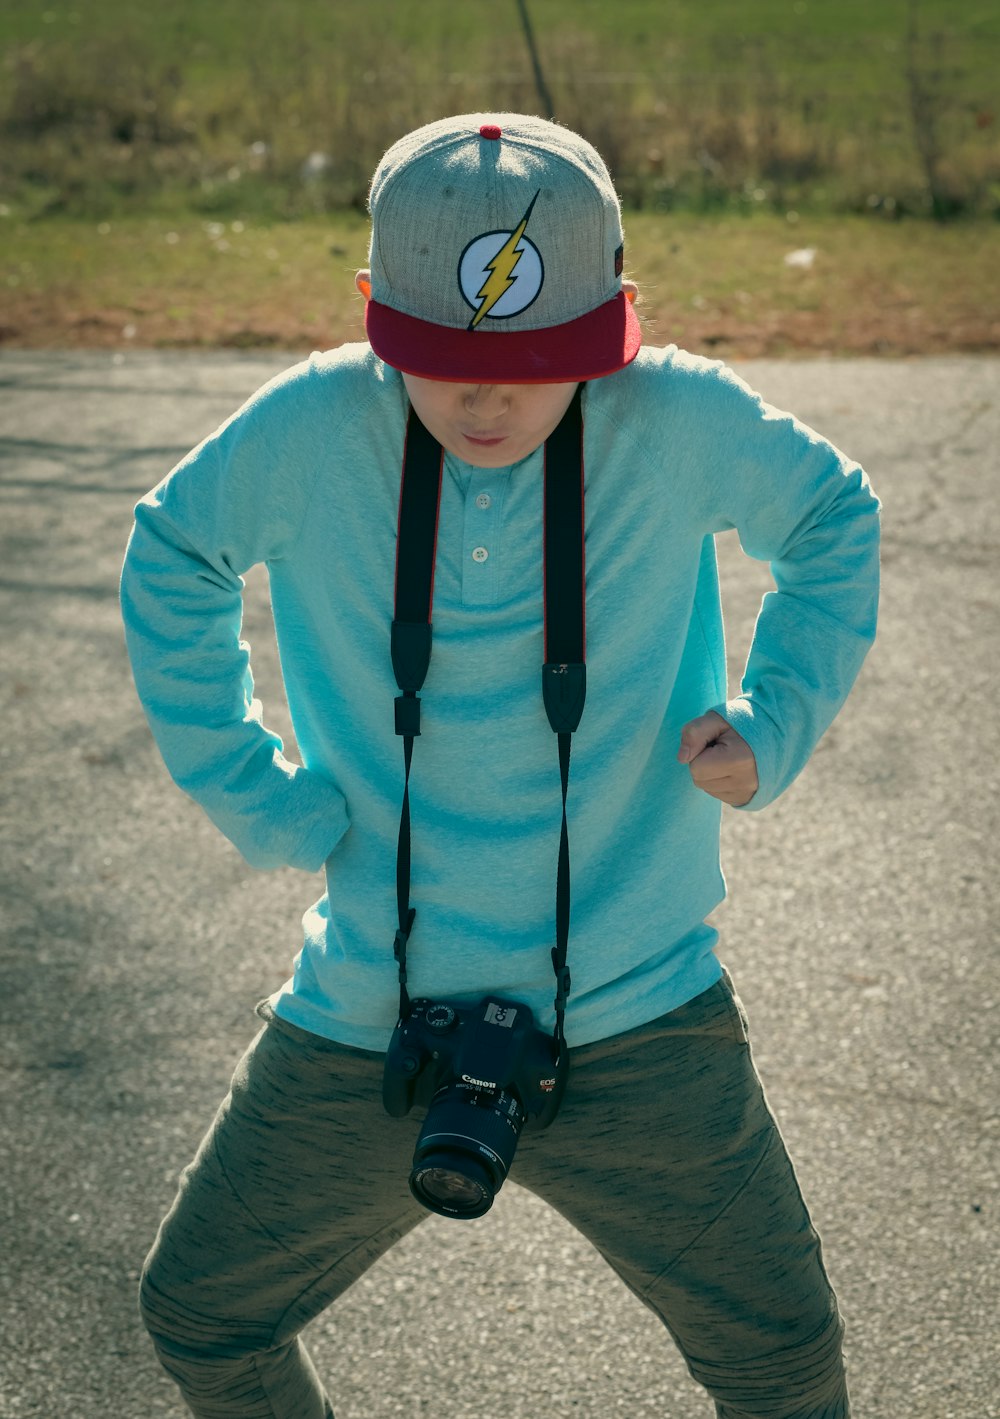 a young boy wearing a hat and holding a camera